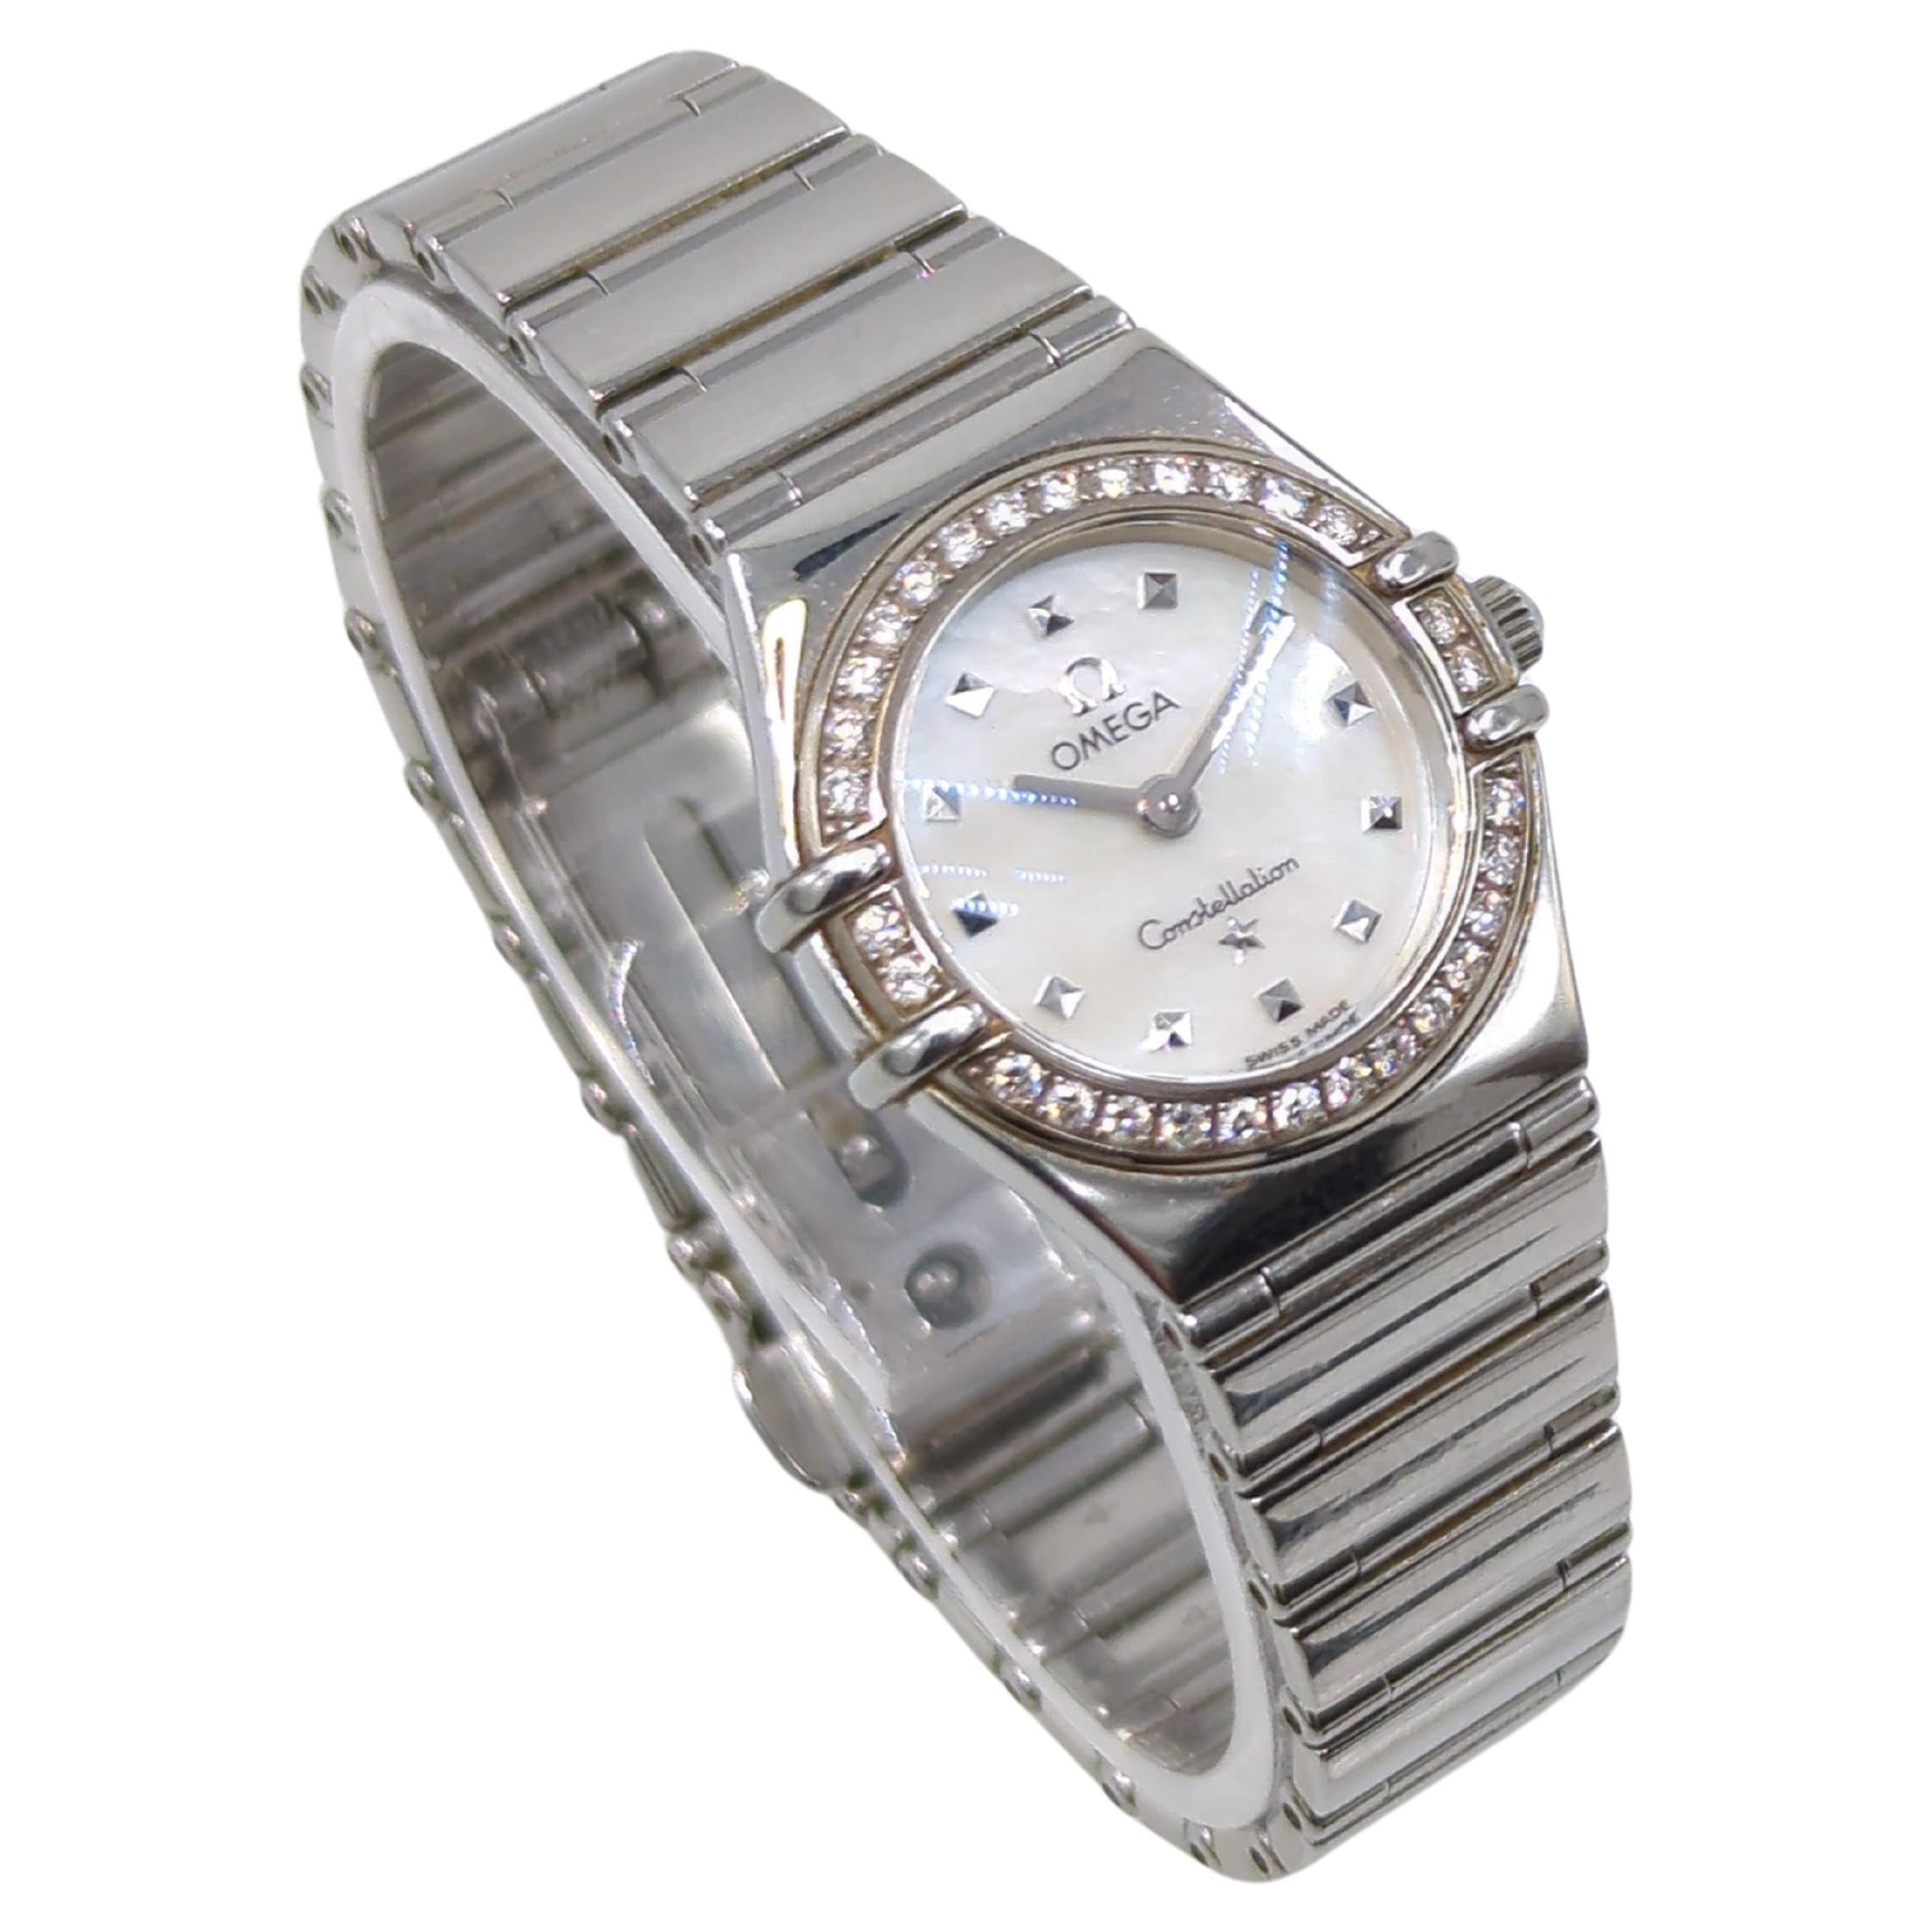 A ladies Omega Stainless Steel Constellation watch with diamond bezel and MOP dial, stick hands, part of the MY CHOICE (Cindy Crawford) collection.

Reference: 1465.71.00
Movement ref: 1456
Case diameter: 22.5mm
Suitable Wrist size: 7 